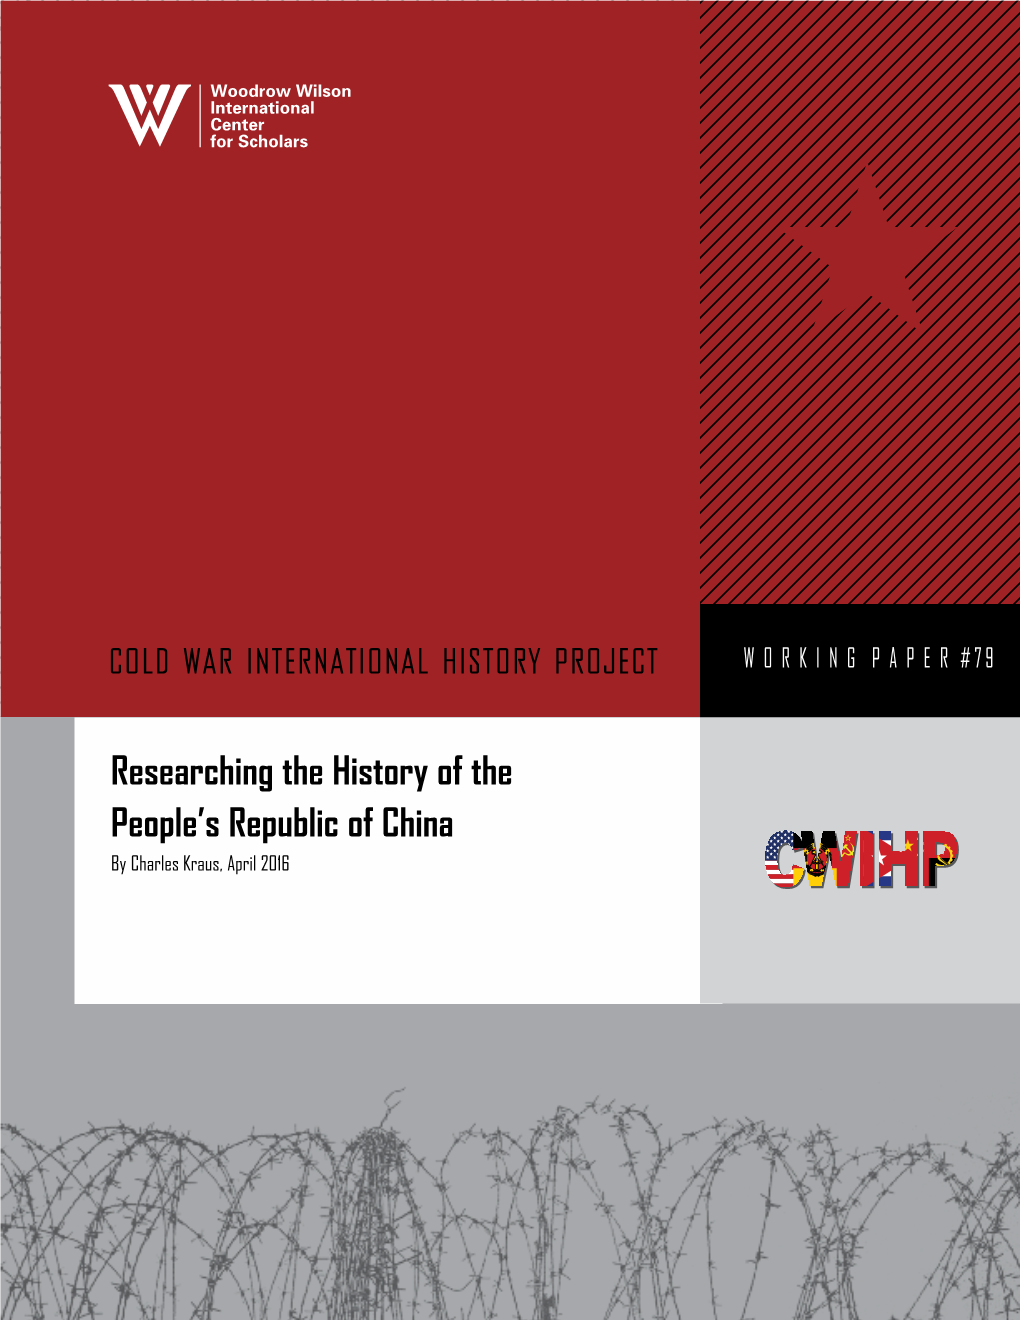 Researching the History of the People's Republic of China